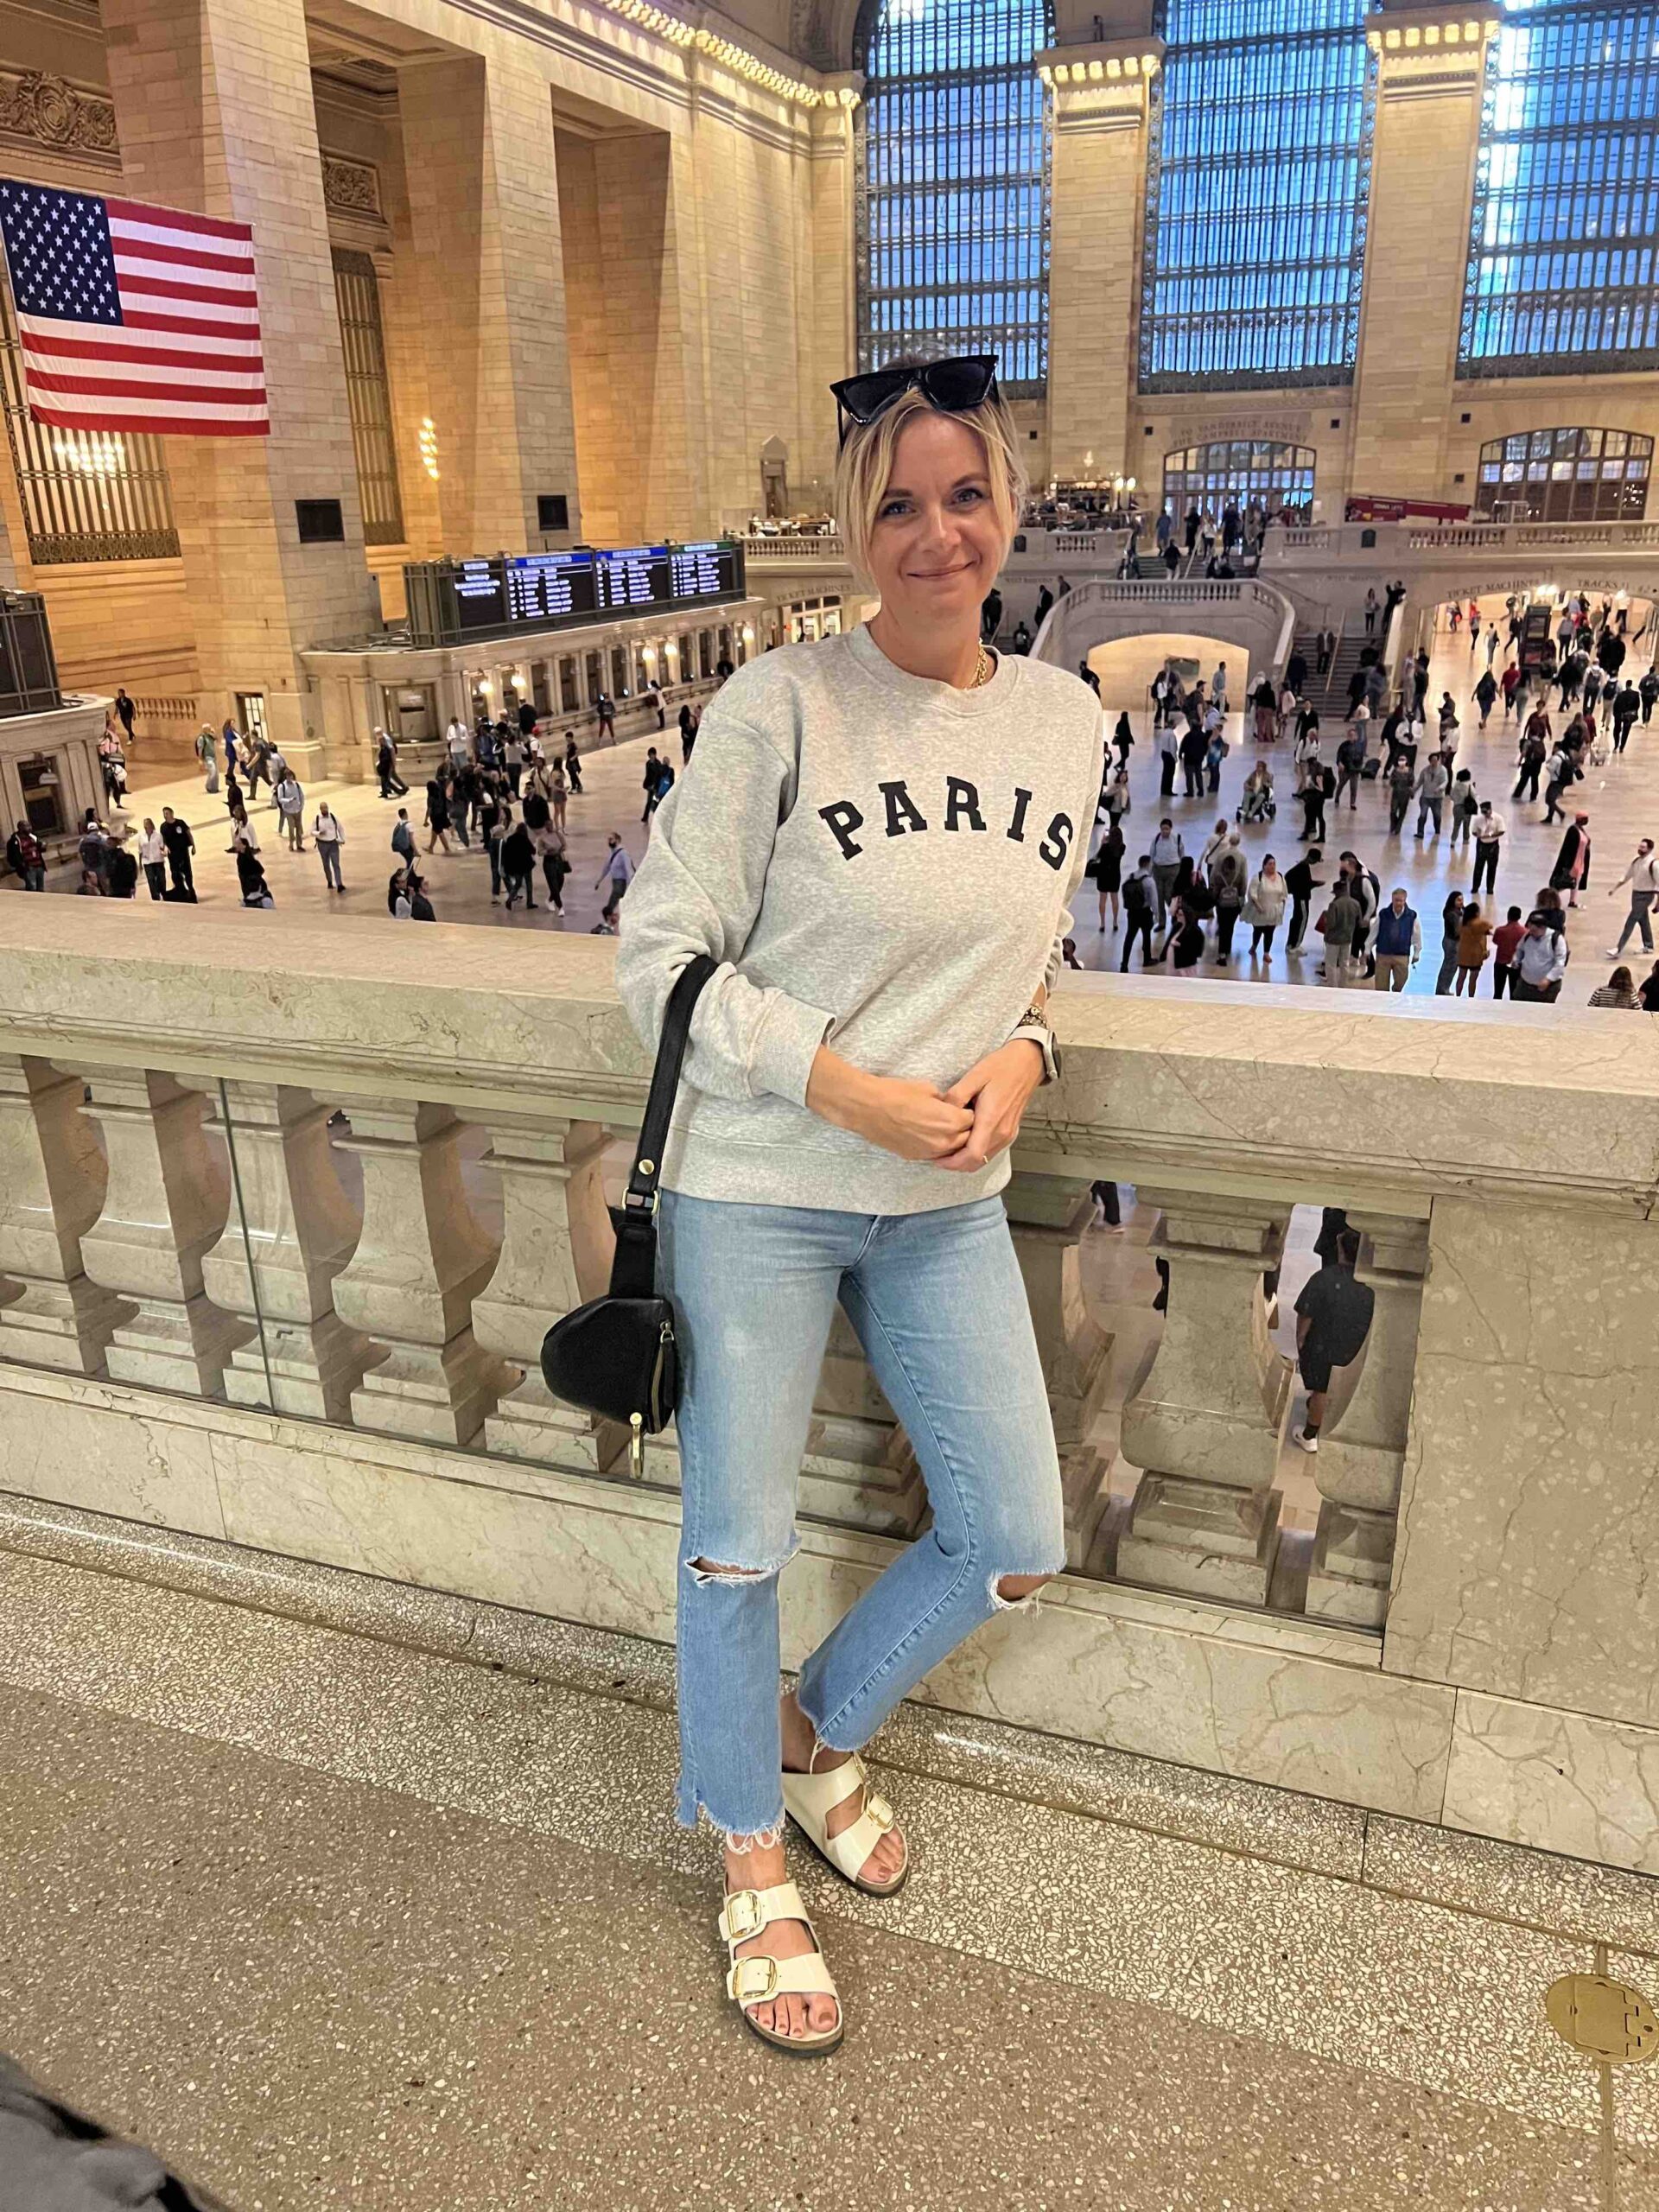 Graphic Sweatshirt & Jeans how to style a graphic sweatshirt how to style Birkenstocks with jeans how to look cute while sightseeing how to look put together for a day of walking cozy but cute style inspo